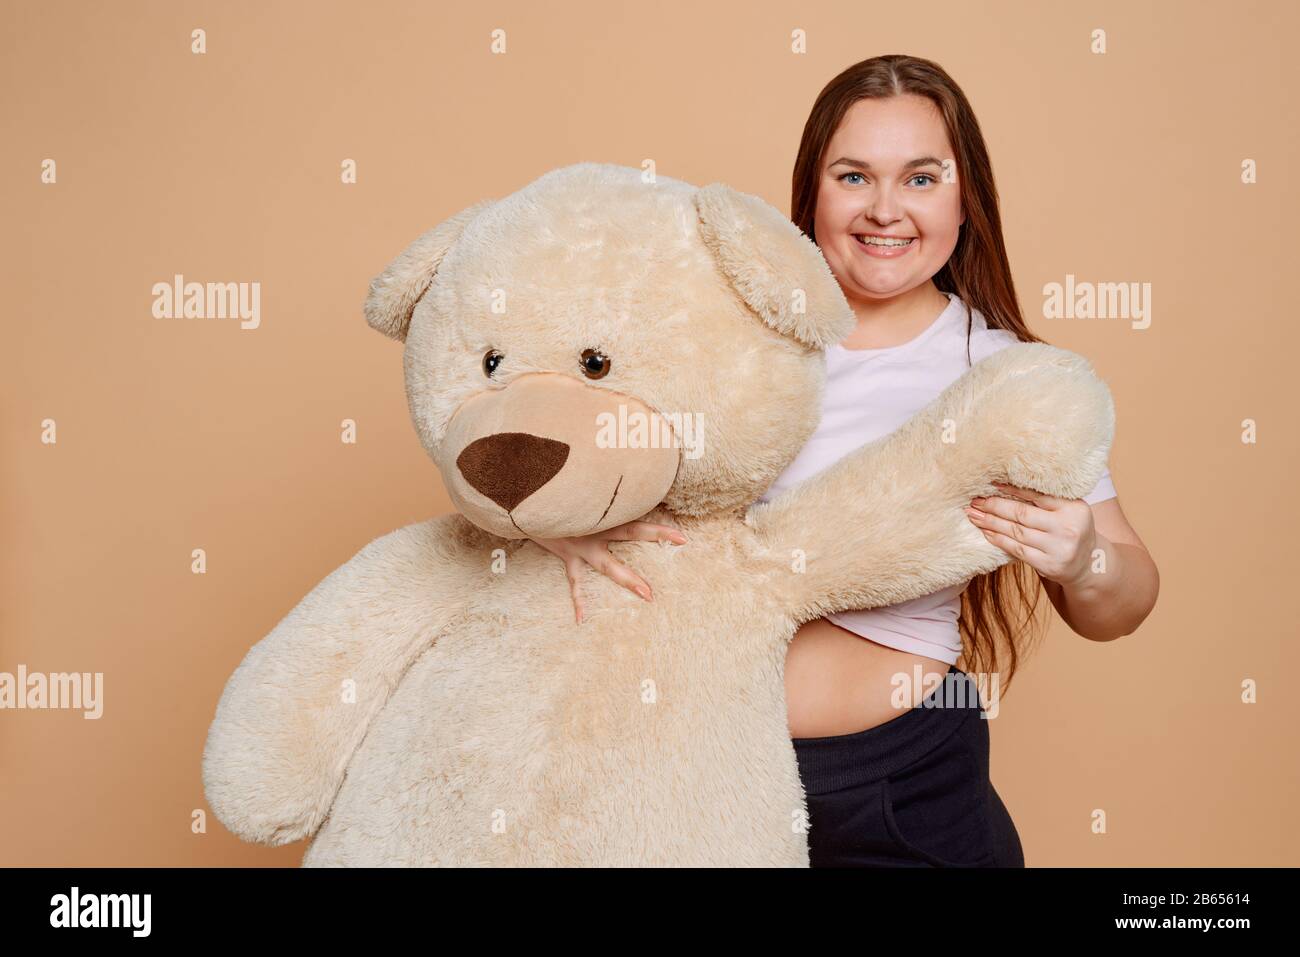 Overweight woman hugging a huge Teddy bear on beige background Stock Photo